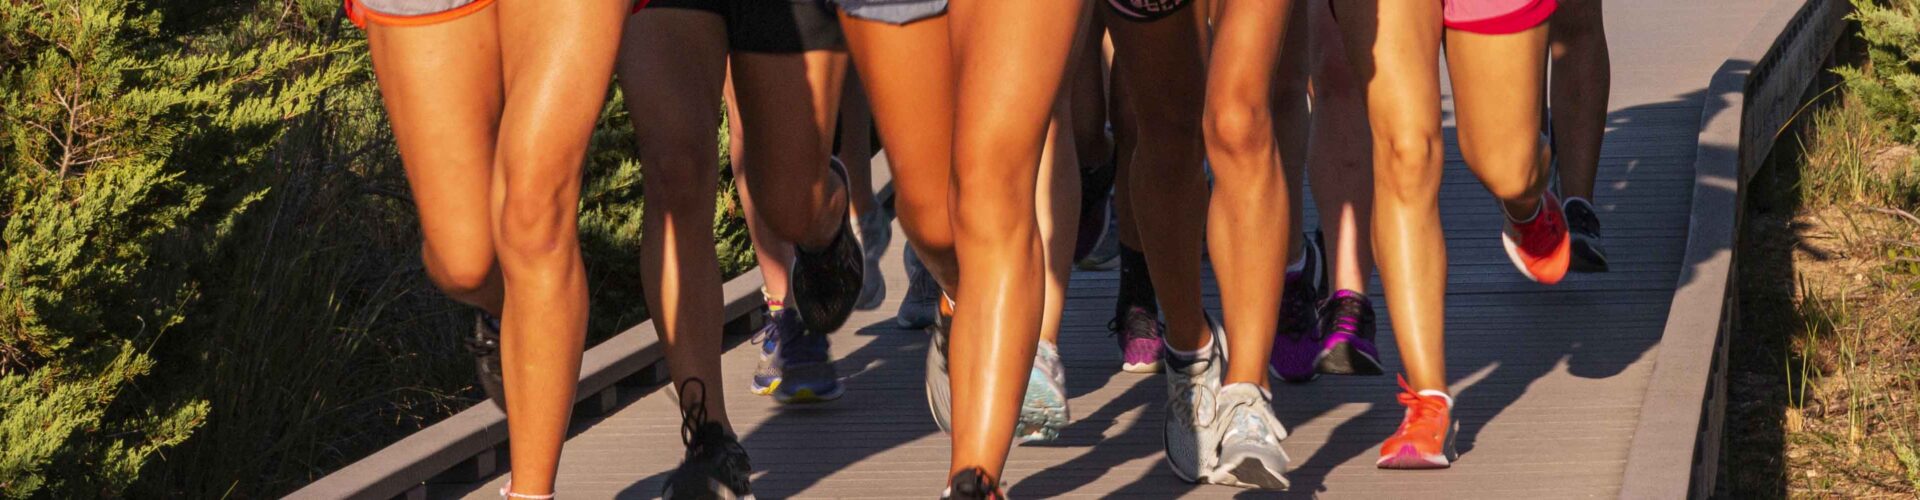 Legs of female runners in shorts running in the sunshine on a boardwalk at the beach